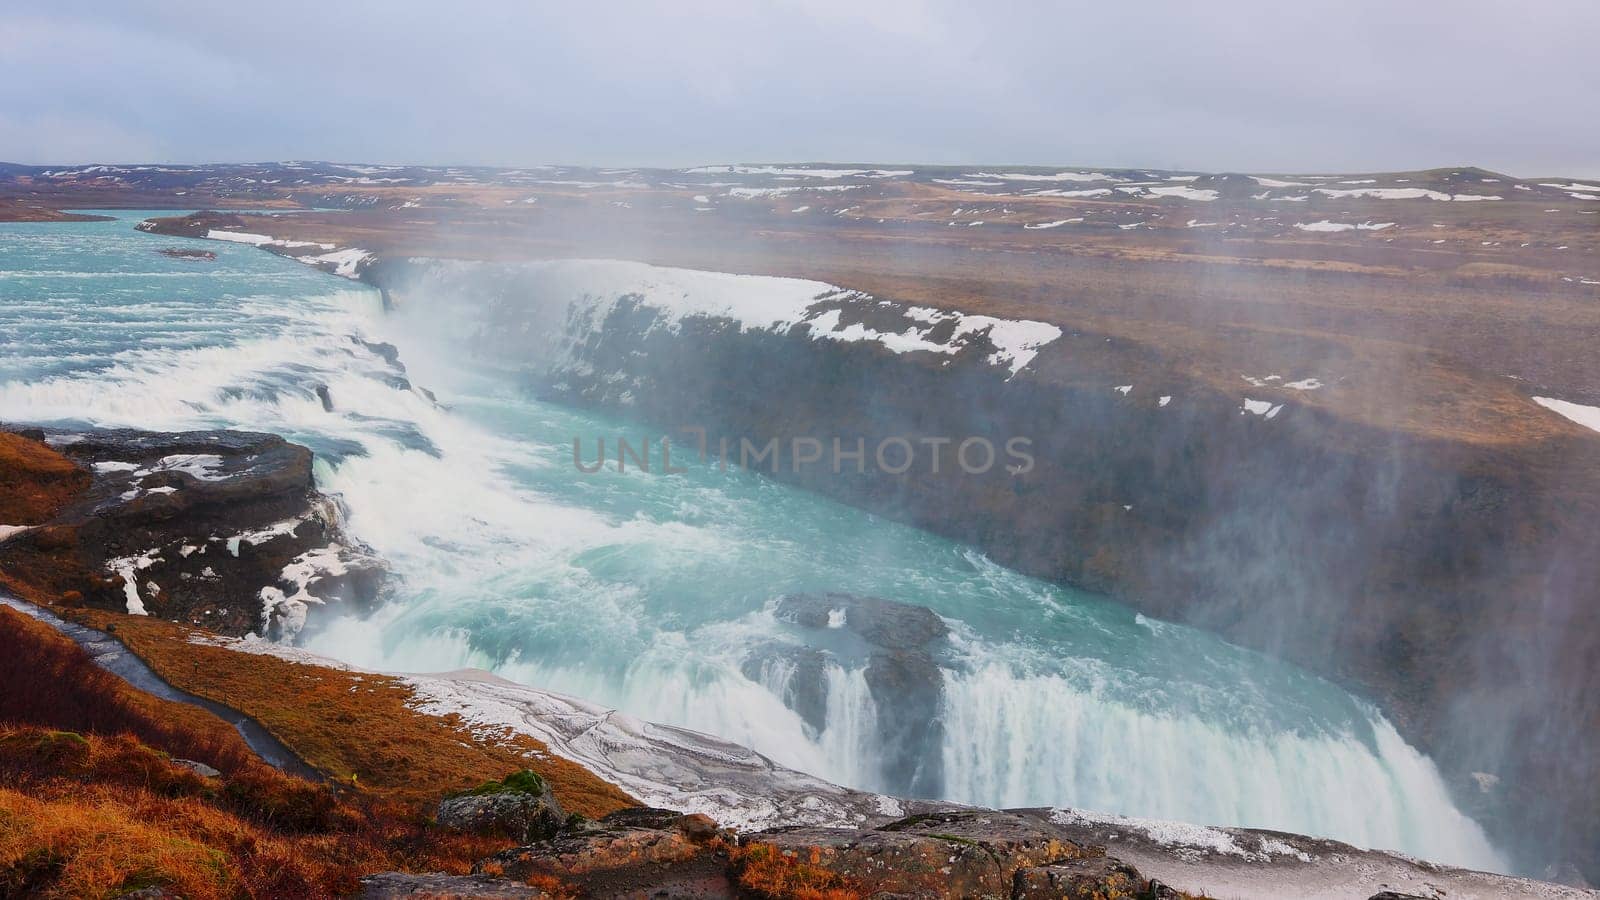 Gullfoss waterfall in reykjavik iceland, spectacular nordic landscape with snow and cold water falling off cliff. River scenery on top of the hill, icelandic nature with cascade. Handheld shot.